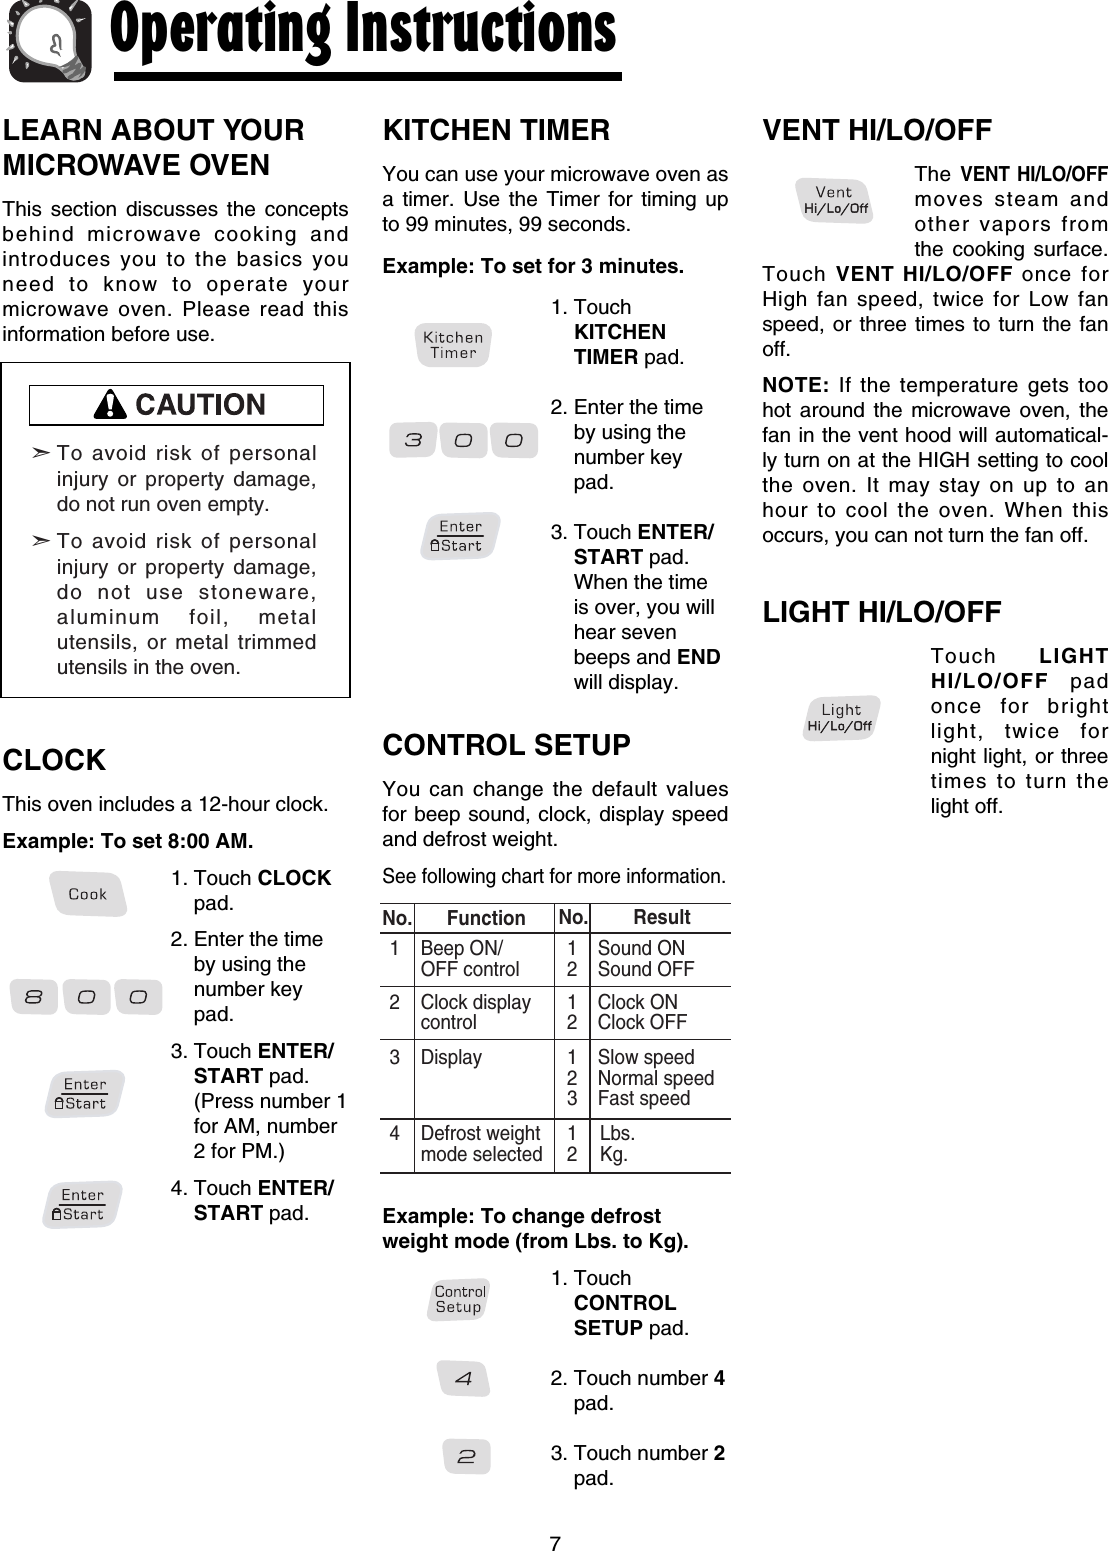 LEARN ABOUT YOURMICROWAVE OVENThis section discusses the conceptsbehind microwave cooking andintroduces you to the basics youneed to know to operate yourmicrowave oven. Please read thisinformation before use.CLOCKThis oven includes a 12-hour clock.Example: To set 8:00 AM.1. Touch CLOCKpad.2. Enter the timeby using thenumber keypad.3. Touch ENTER/START pad.(Press number 1for AM, number2 for PM.)4. Touch ENTER/START pad.KITCHEN TIMERYou can use your microwave oven asa timer. Use the Timer for timing upto 99 minutes, 99 seconds.Example: To set for 3 minutes.1. TouchKITCHENTIMER pad.2. Enter the timeby using thenumber keypad.3. Touch ENTER/START pad.When the timeis over, you willhear sevenbeeps and ENDwill display.CONTROL SETUPYou can change the default valuesfor beep sound, clock, display speedand defrost weight. See following chart for more information.Example: To change defrostweight mode (from Lbs. to Kg).1. TouchCONTROLSETUP pad.2. Touch number 4pad.3. Touch number 2pad.VENT HI/LO/OFFThe VENT HI/LO/OFFmoves steam andother vapors fromthe cooking surface.Touch VENT HI/LO/OFF once forHigh fan speed, twice for Low fanspeed, or three times to turn the fanoff.NOTE: If the temperature gets toohot around the microwave oven, thefan in the vent hood will automatical-ly turn on at the HIGH setting to coolthe oven. It may stay on up to anhour to cool the oven. When thisoccurs, you can not turn the fan off.LIGHT HI/LO/OFFTouch  LIGHTHI/LO/OFF padonce for brightlight, twice fornight light, or threetimes to turn thelight off.7Operating Instructions➣To avoid risk of personalinjury or property damage,do not run oven empty.➣To avoid risk of personalinjury or property damage,do not use stoneware,aluminum foil, metalutensils, or metal trimmedutensils in the oven.No. Function1 Beep ON/ 1 Sound ONOFF control 2 Sound OFF2 Clock display 1 Clock ONcontrol 2 Clock OFF3 Display 1 Slow speed2 Normal speed3 Fast speed4 Defrost weight 1 Lbs.mode selected 2 Kg.No. Result